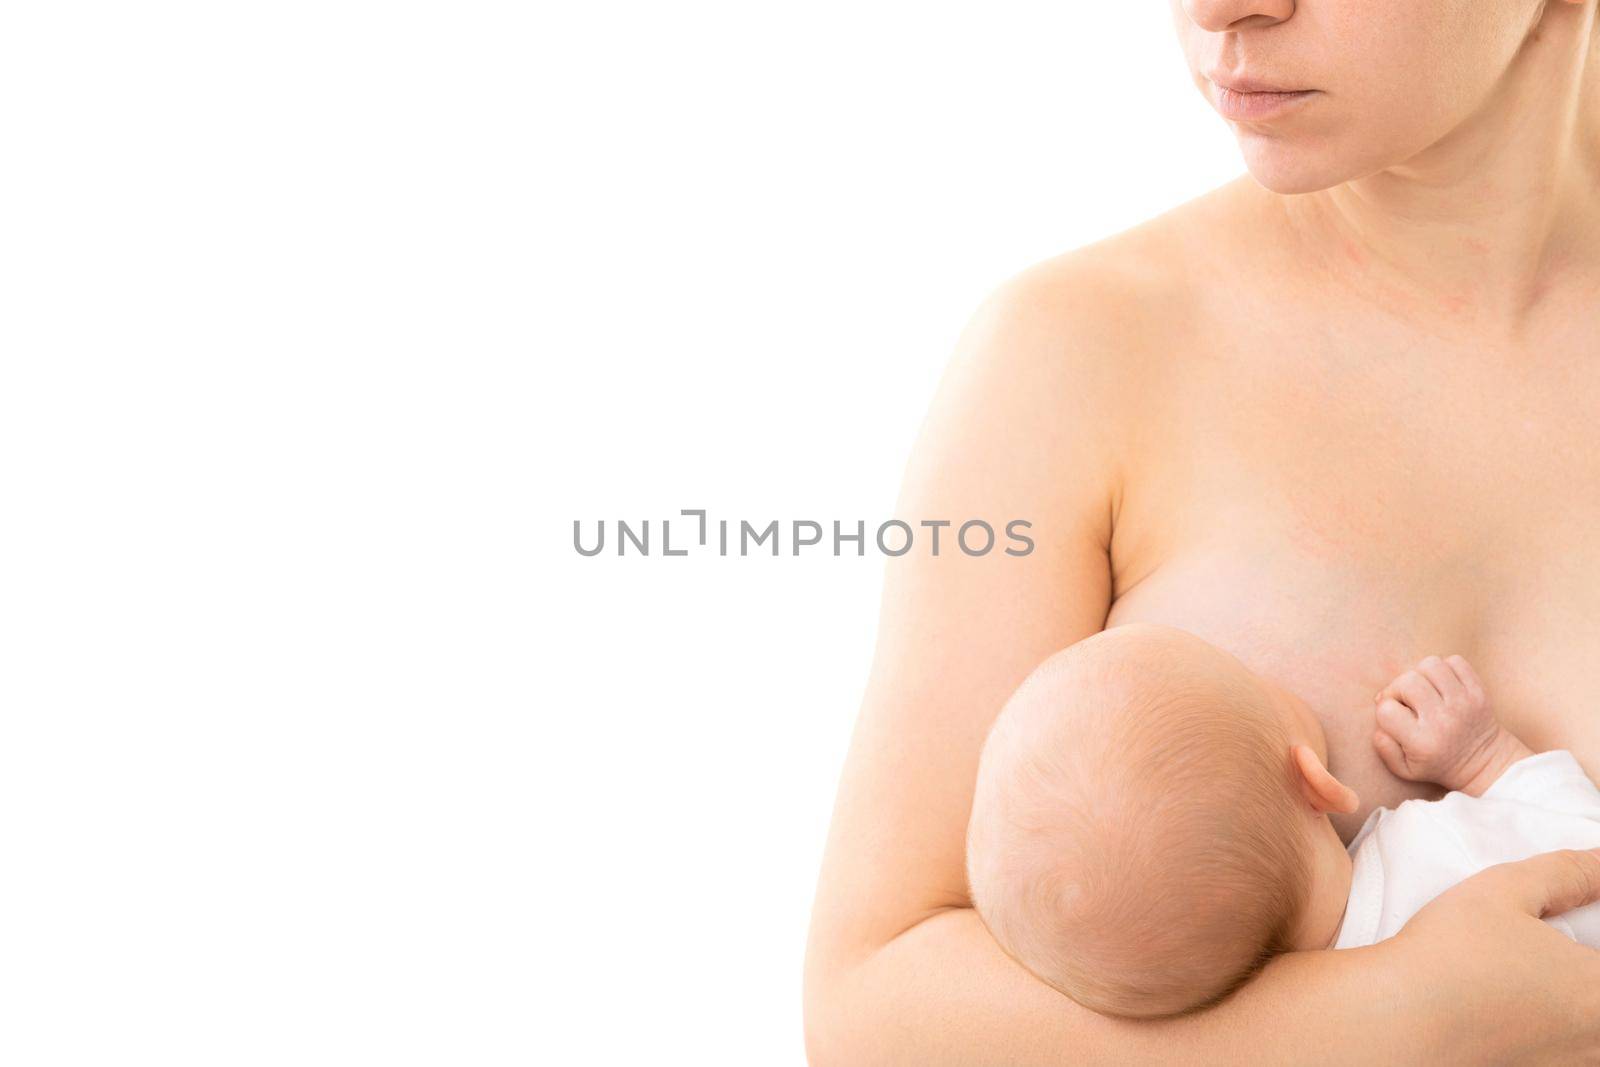 newborn baby takes mother's breast and drinks milk on a white background by TRMK